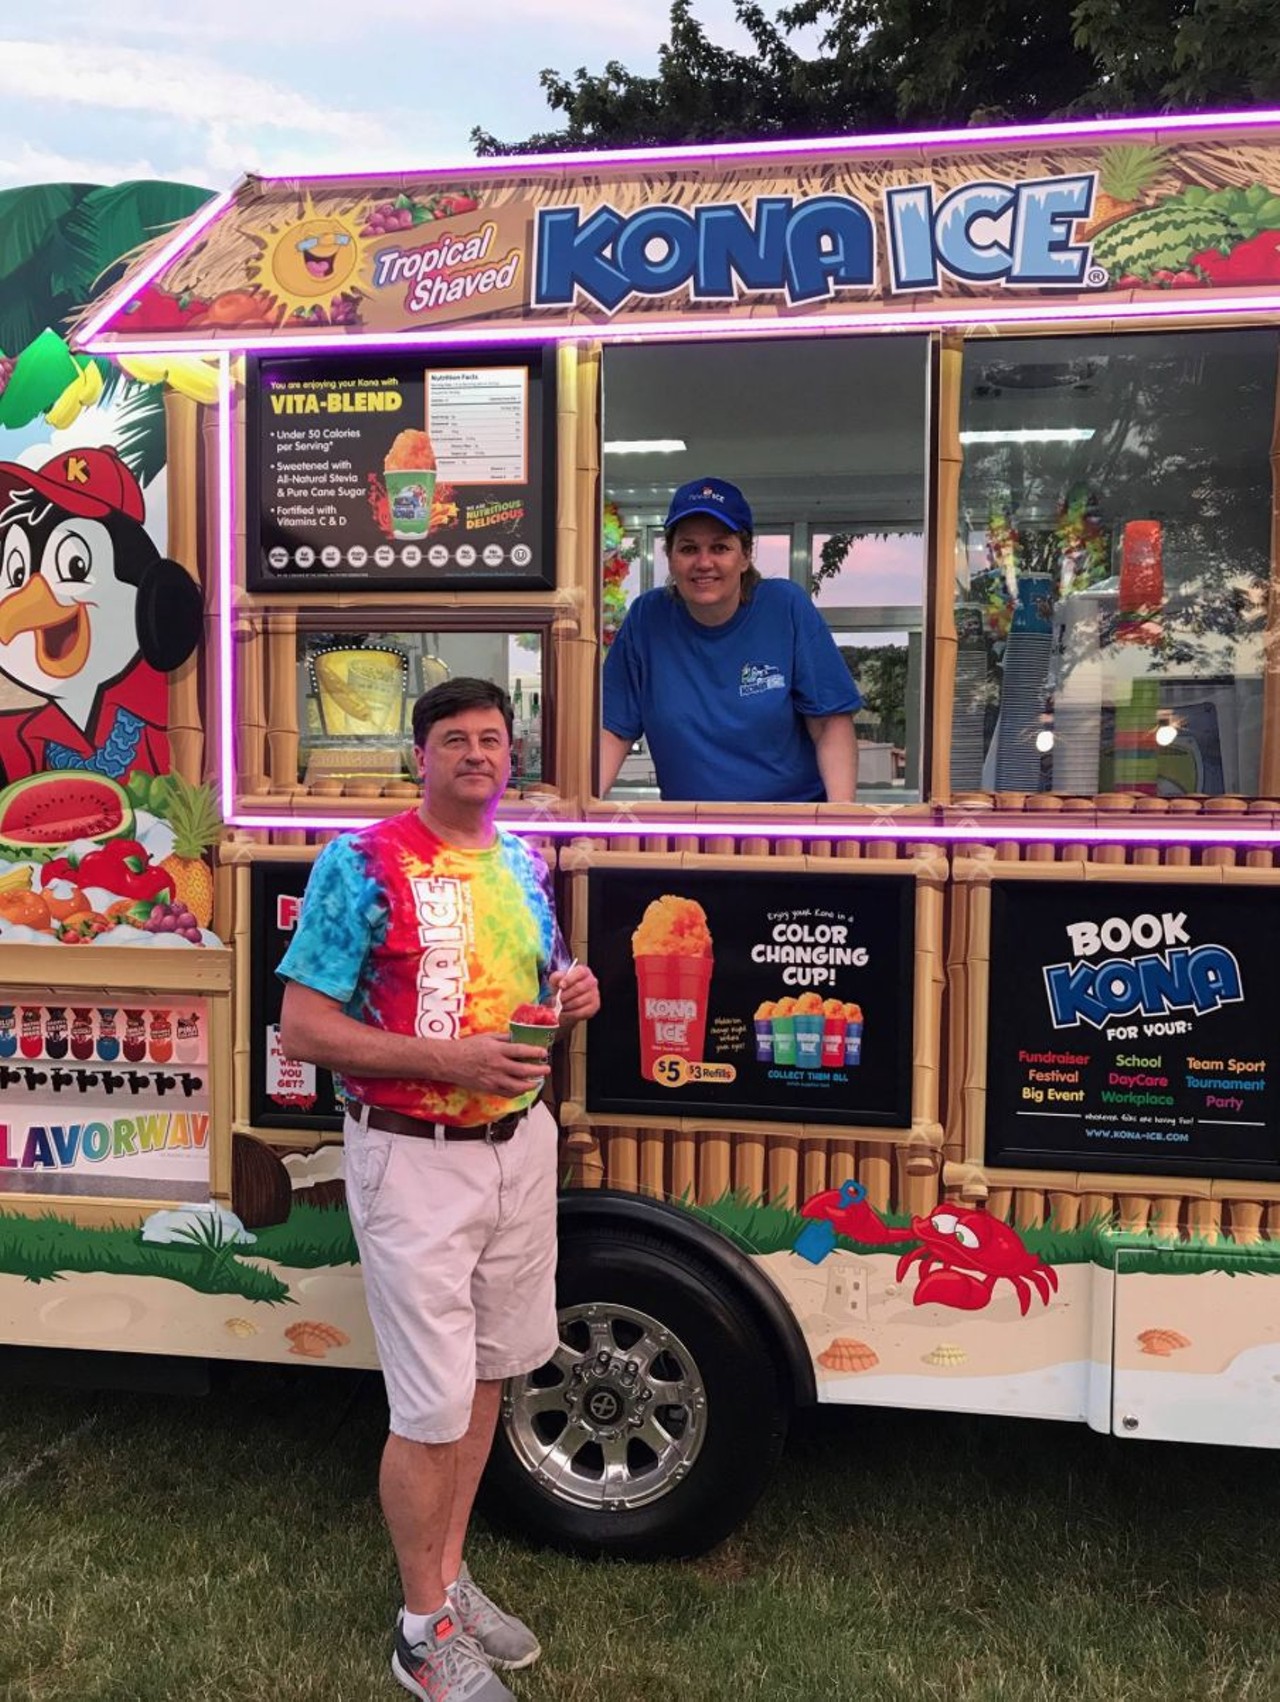  Kona Ice
216-543-5653
Plus, the company uses no artificial sweeteners or high fructose corn syrup in their products. 
Photo via Kona Ice/Facebook